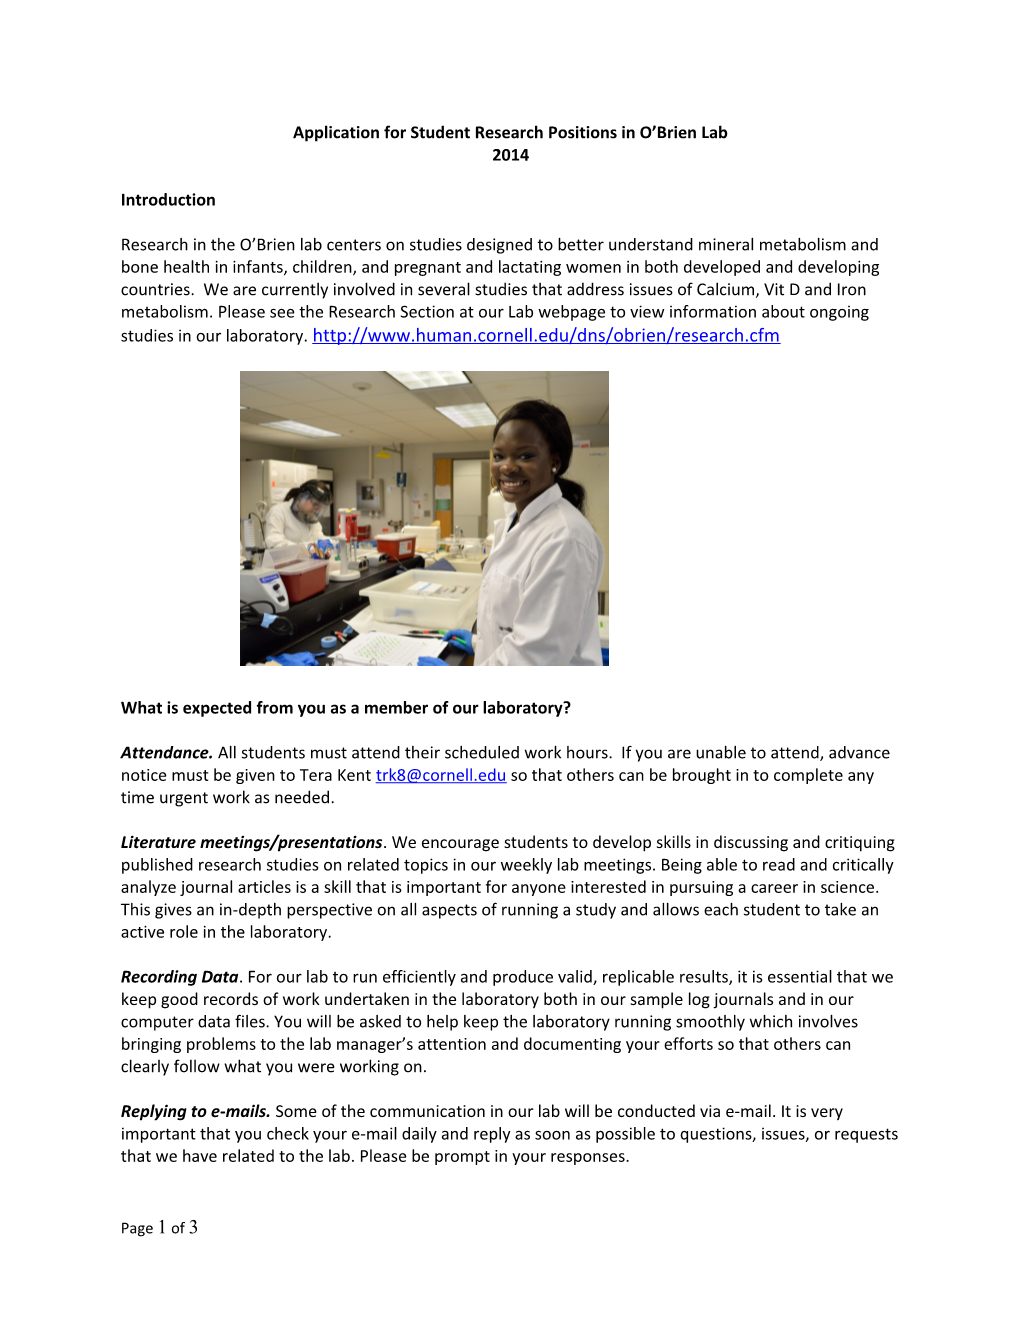 Application for Work in the Strupp Lab